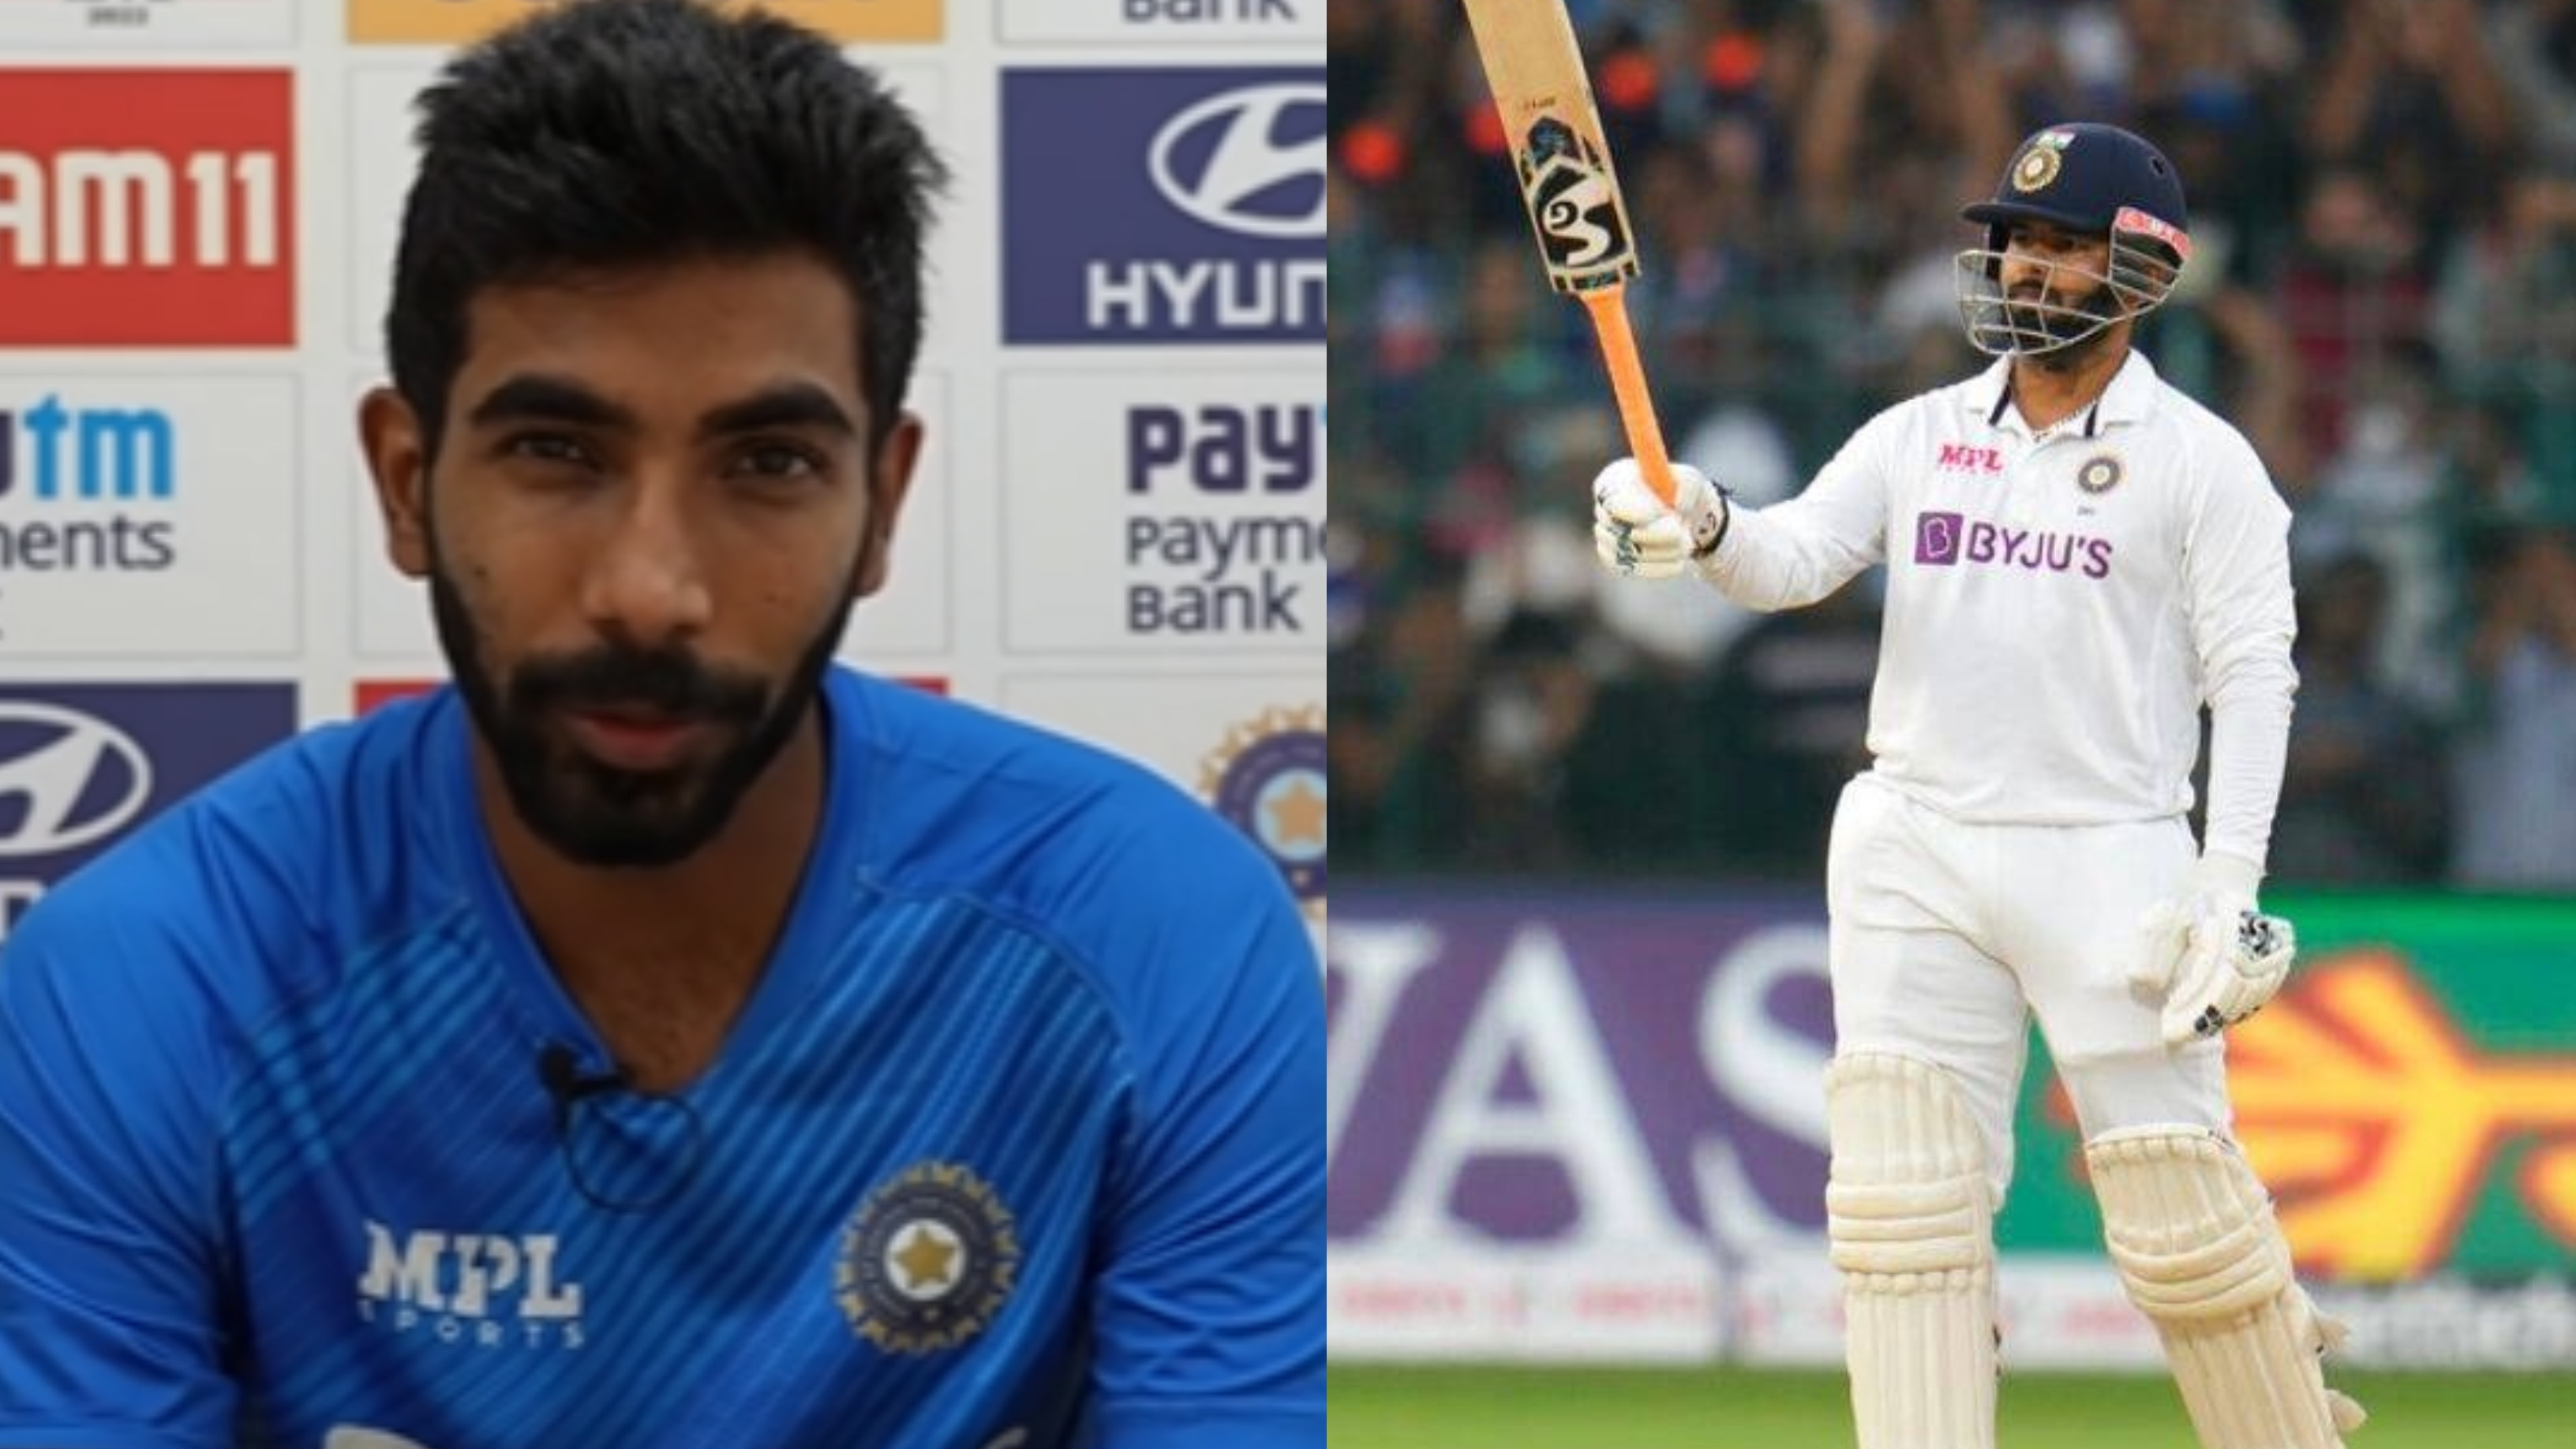 IND v SL 2022: ‘Not everyone can play in the same manner”, Bumrah lauds Rishabh Pant’s attacking approach